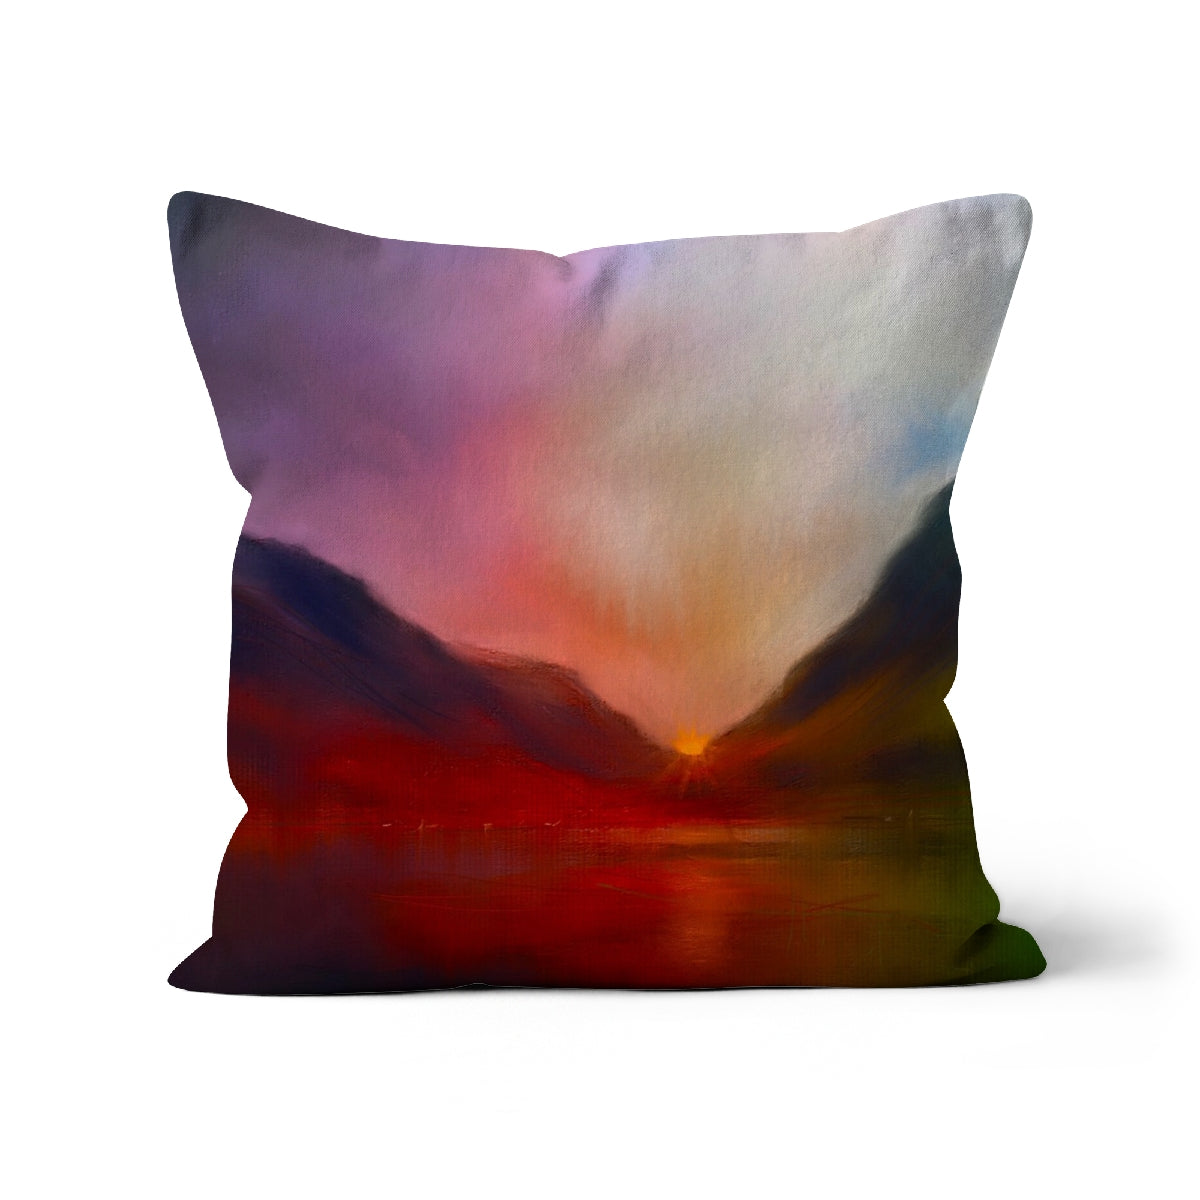 Glencoe Sunset Art Gifts Cushion-Cushions-Glencoe Art Gallery-Faux Suede-16"x16"-Paintings, Prints, Homeware, Art Gifts From Scotland By Scottish Artist Kevin Hunter